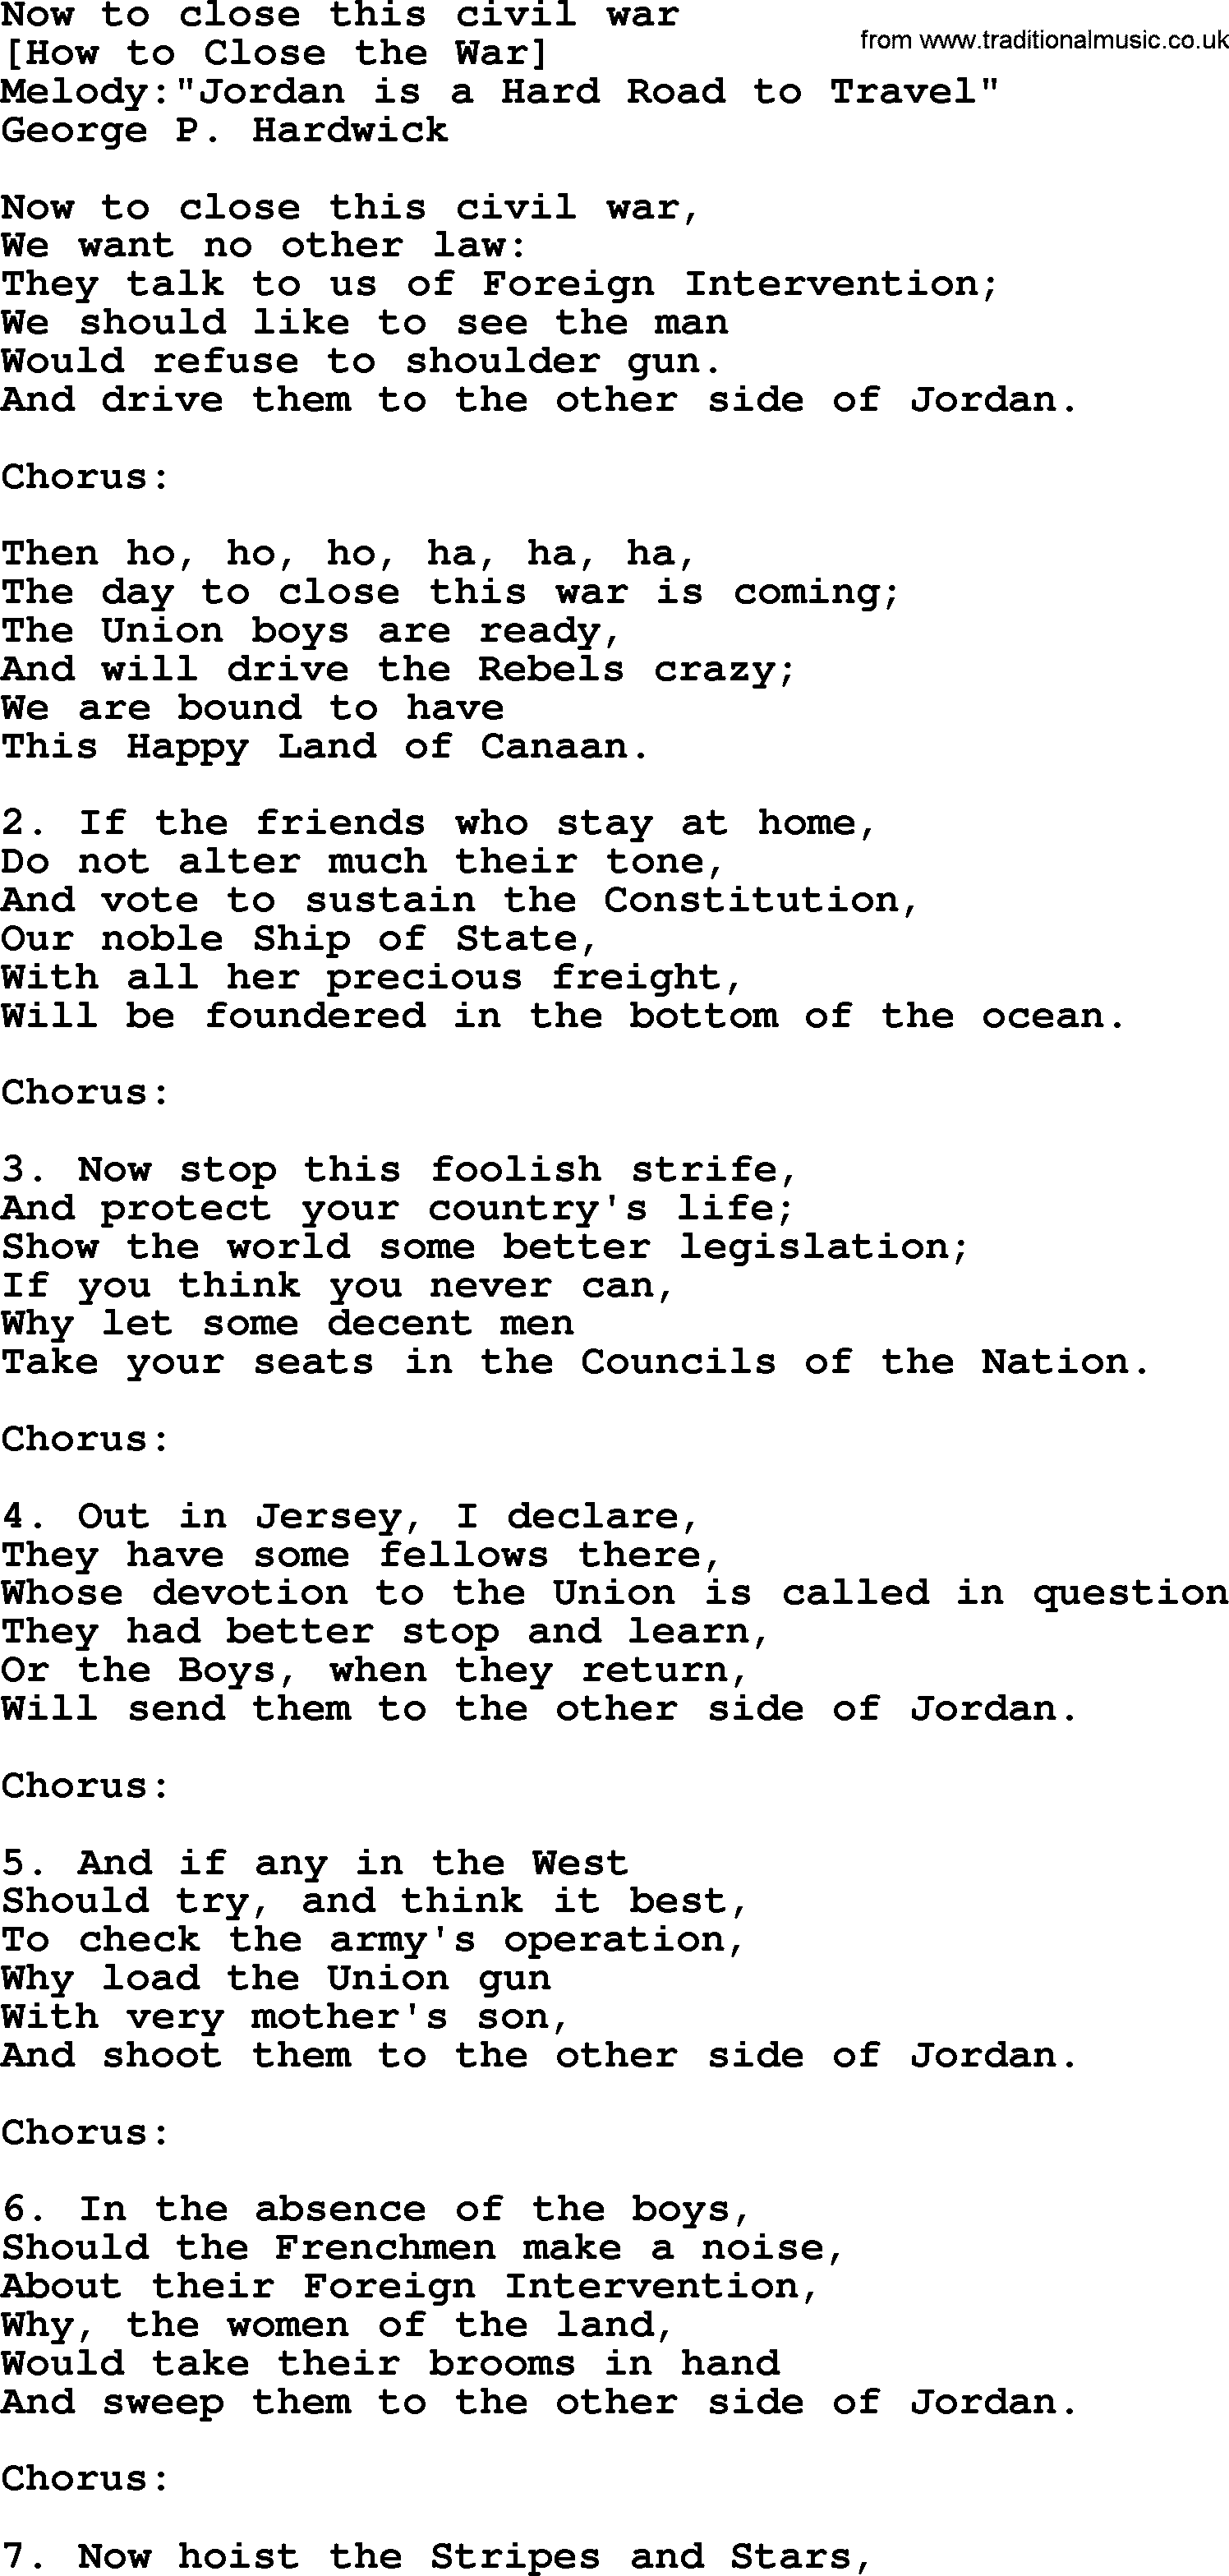 Old American Song: Now To Close This Civil War, lyrics